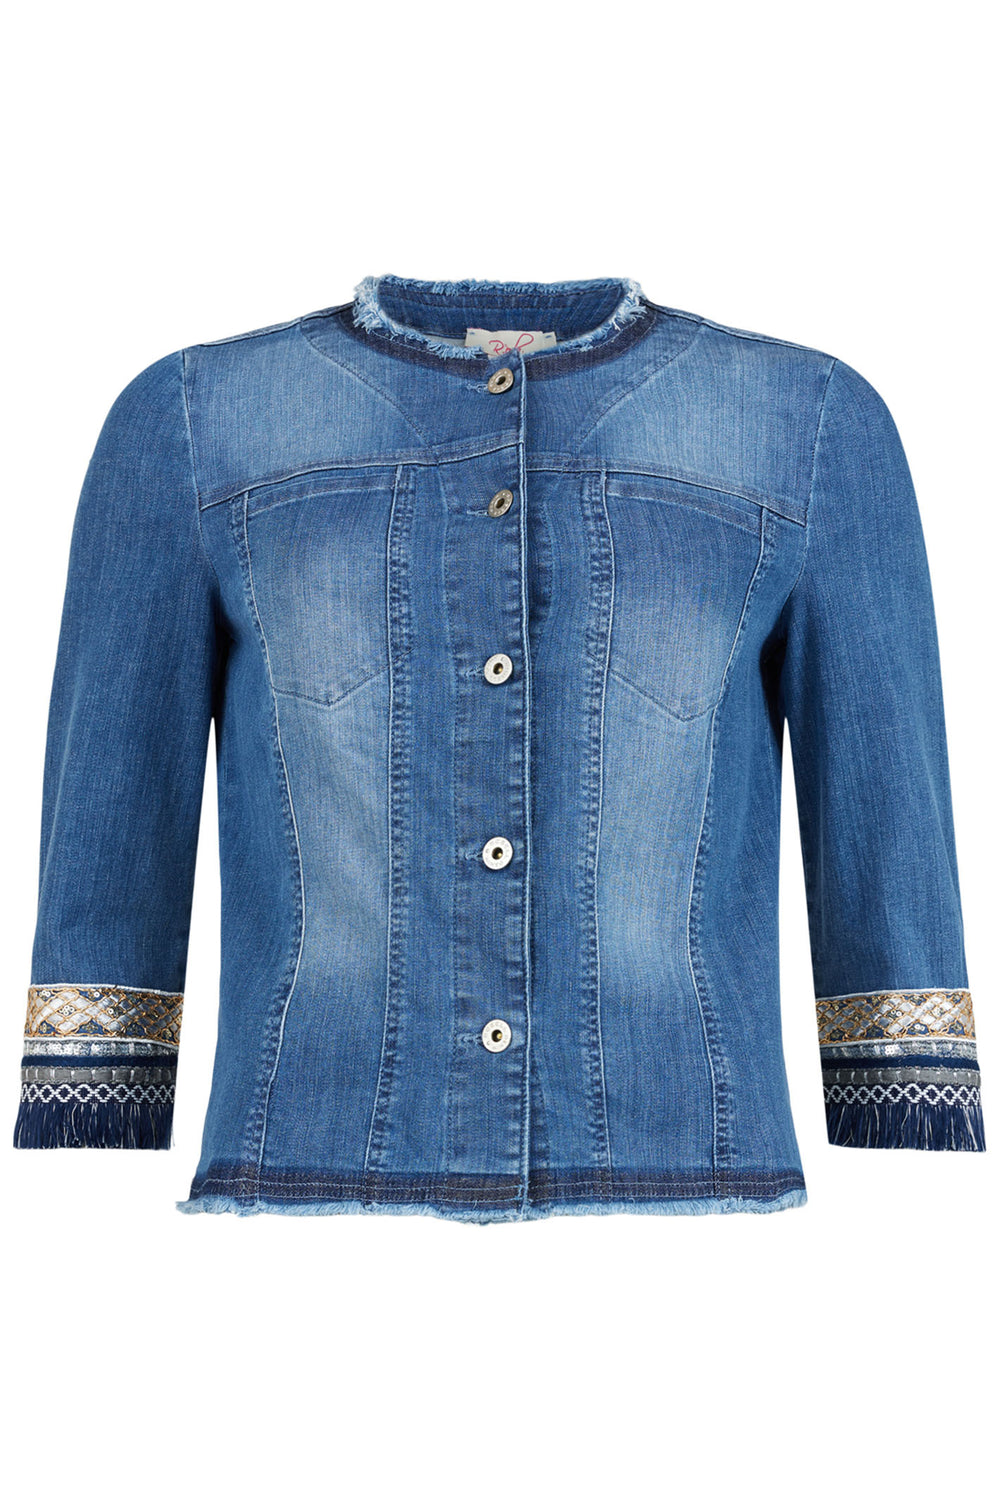 Robell R.O.B 57423 Josy Blue Denim Round Neck Embroidered Jacket - Experience Boutique